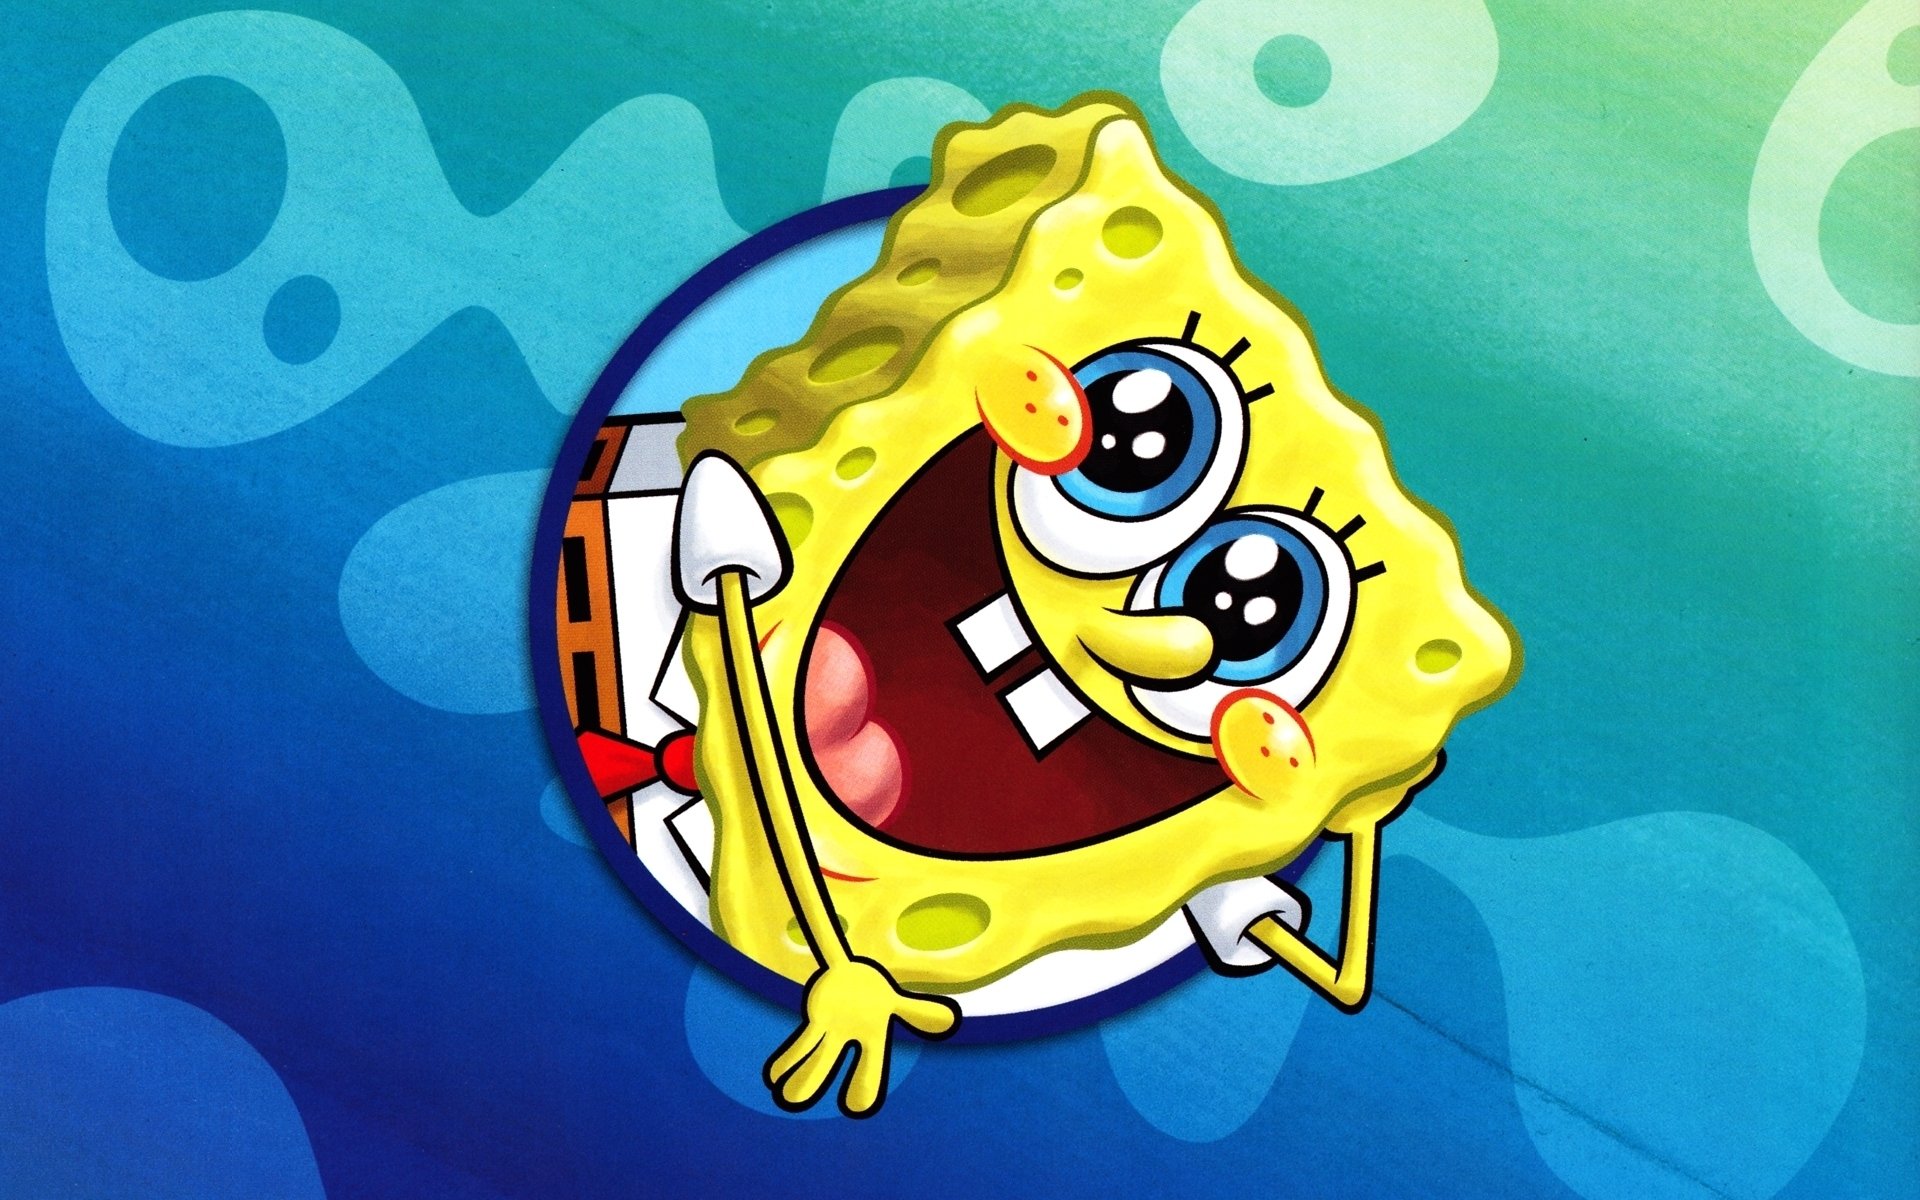 Spongebob 4K wallpaper for your desktop or mobile screen free and easy to download